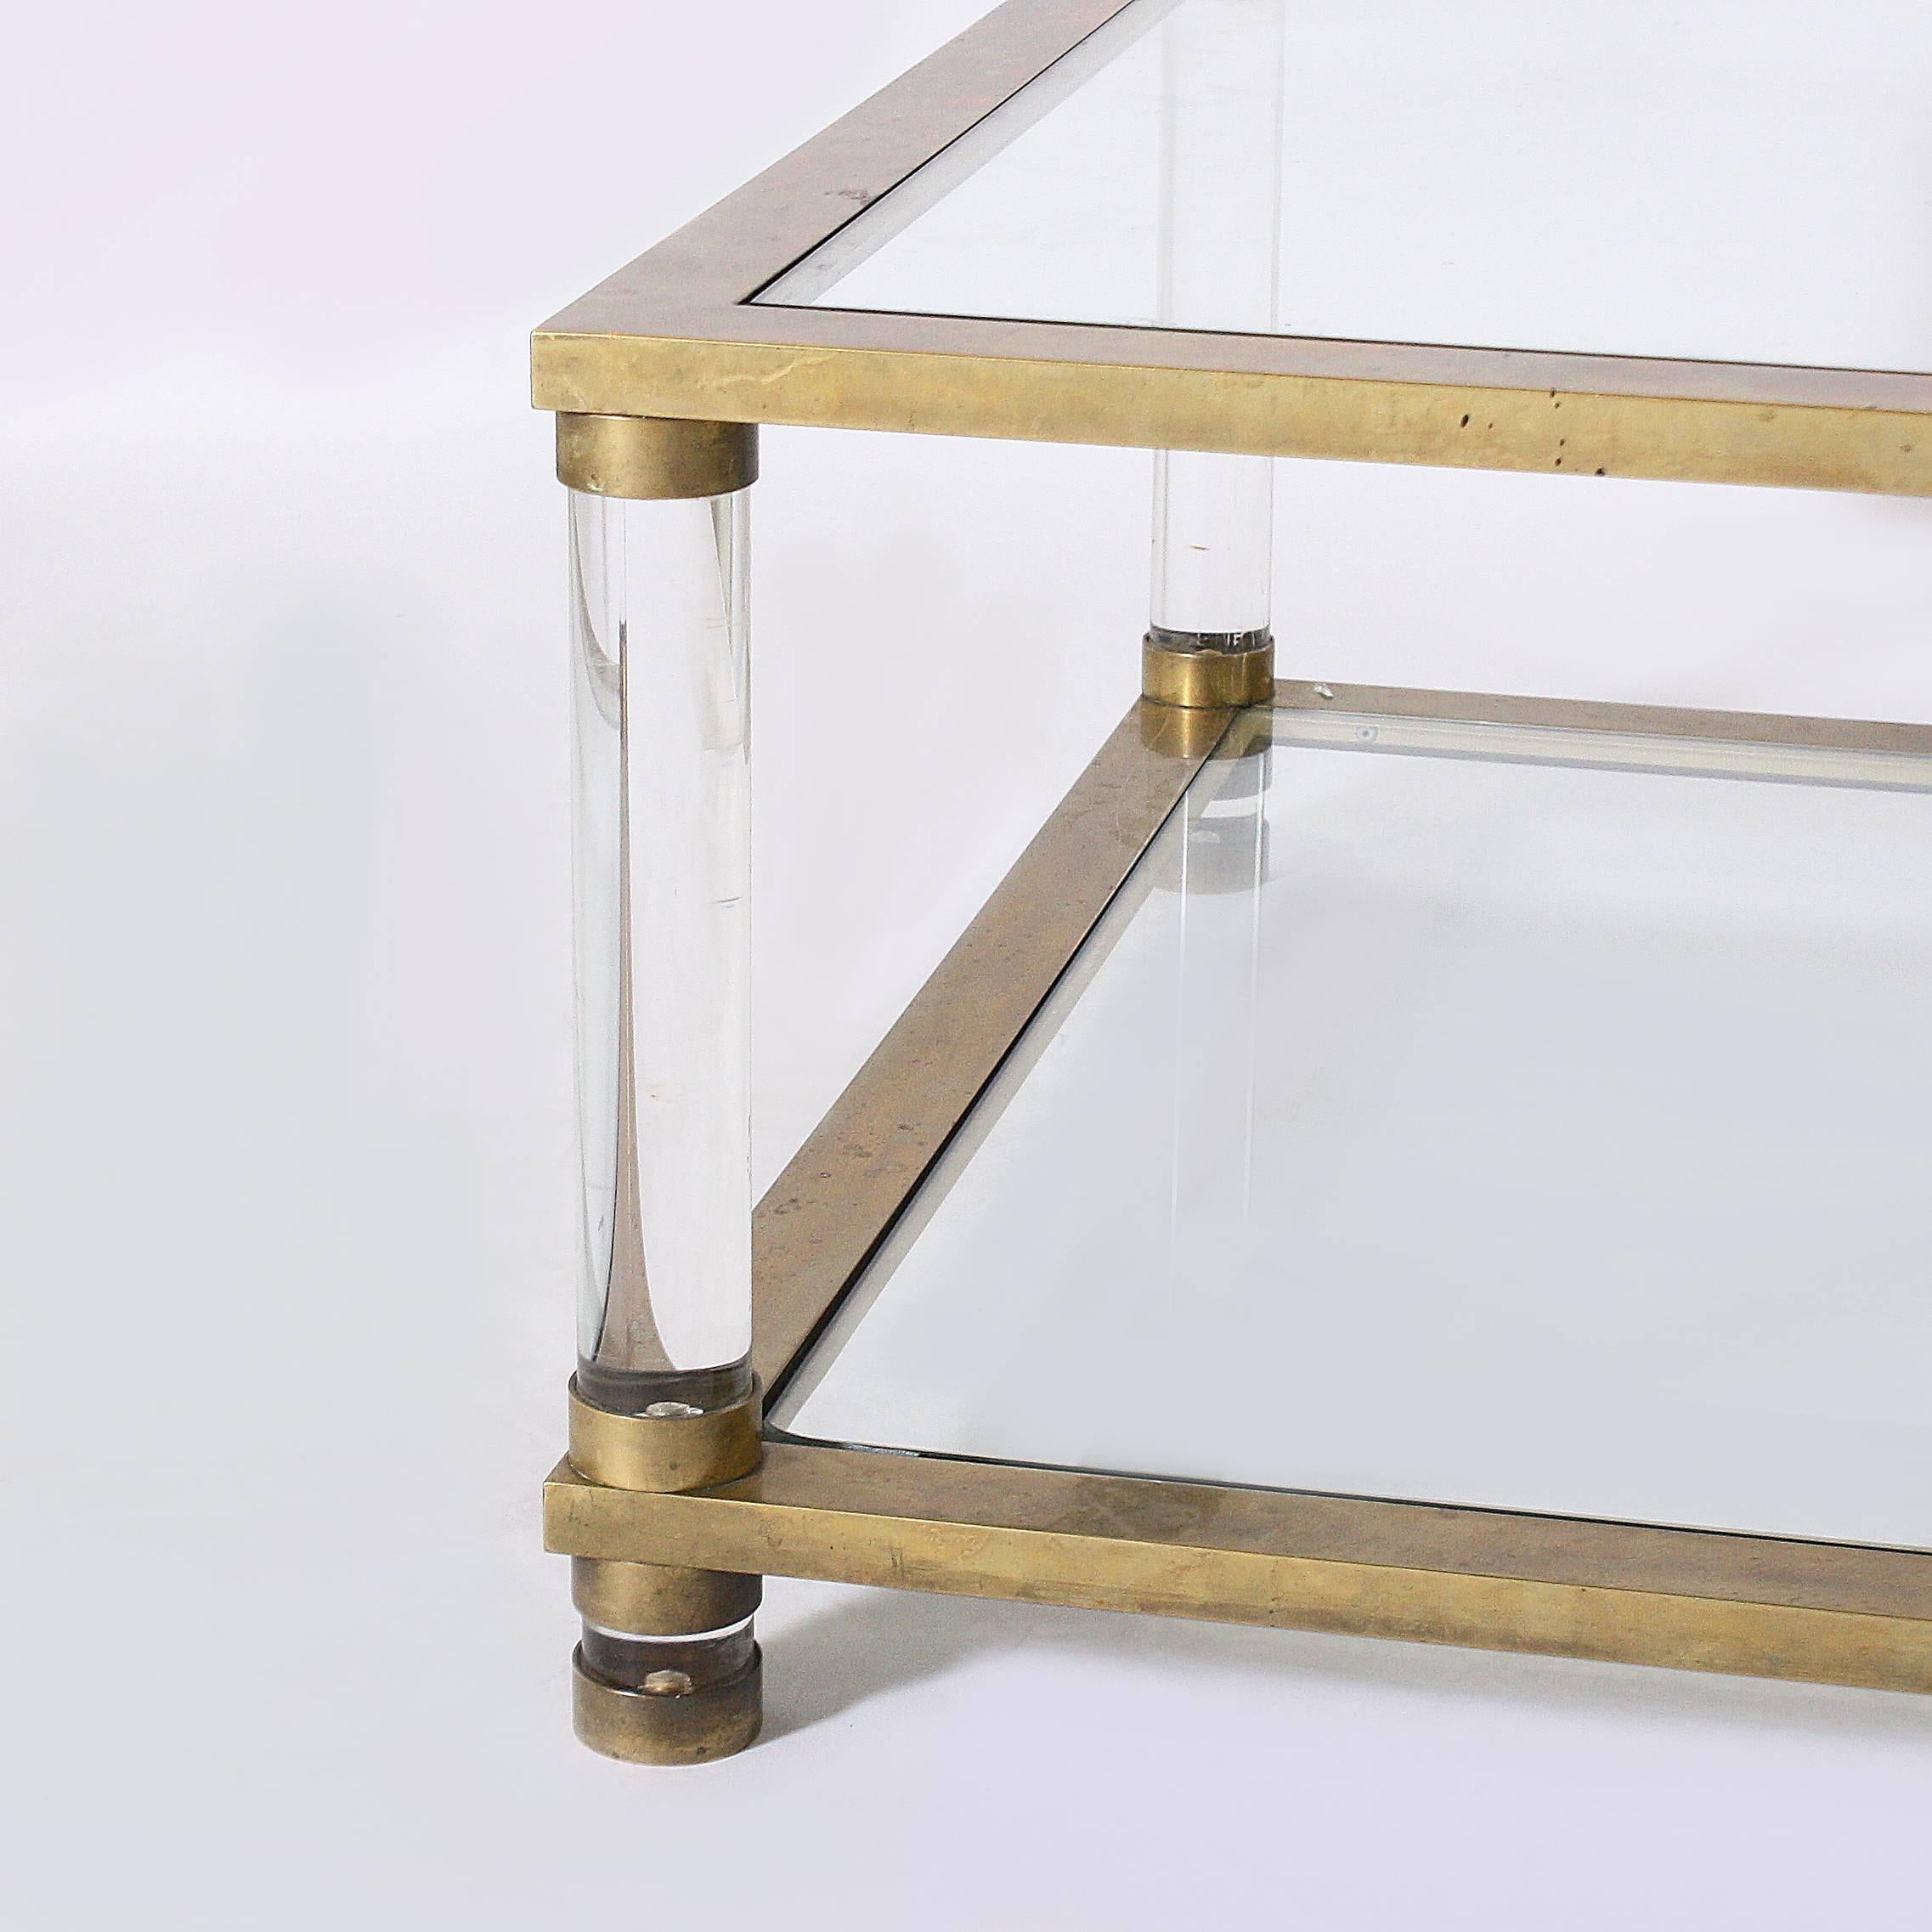 French brass coffee table with round Lucite legs and clear glass tops, circa 1970.
    